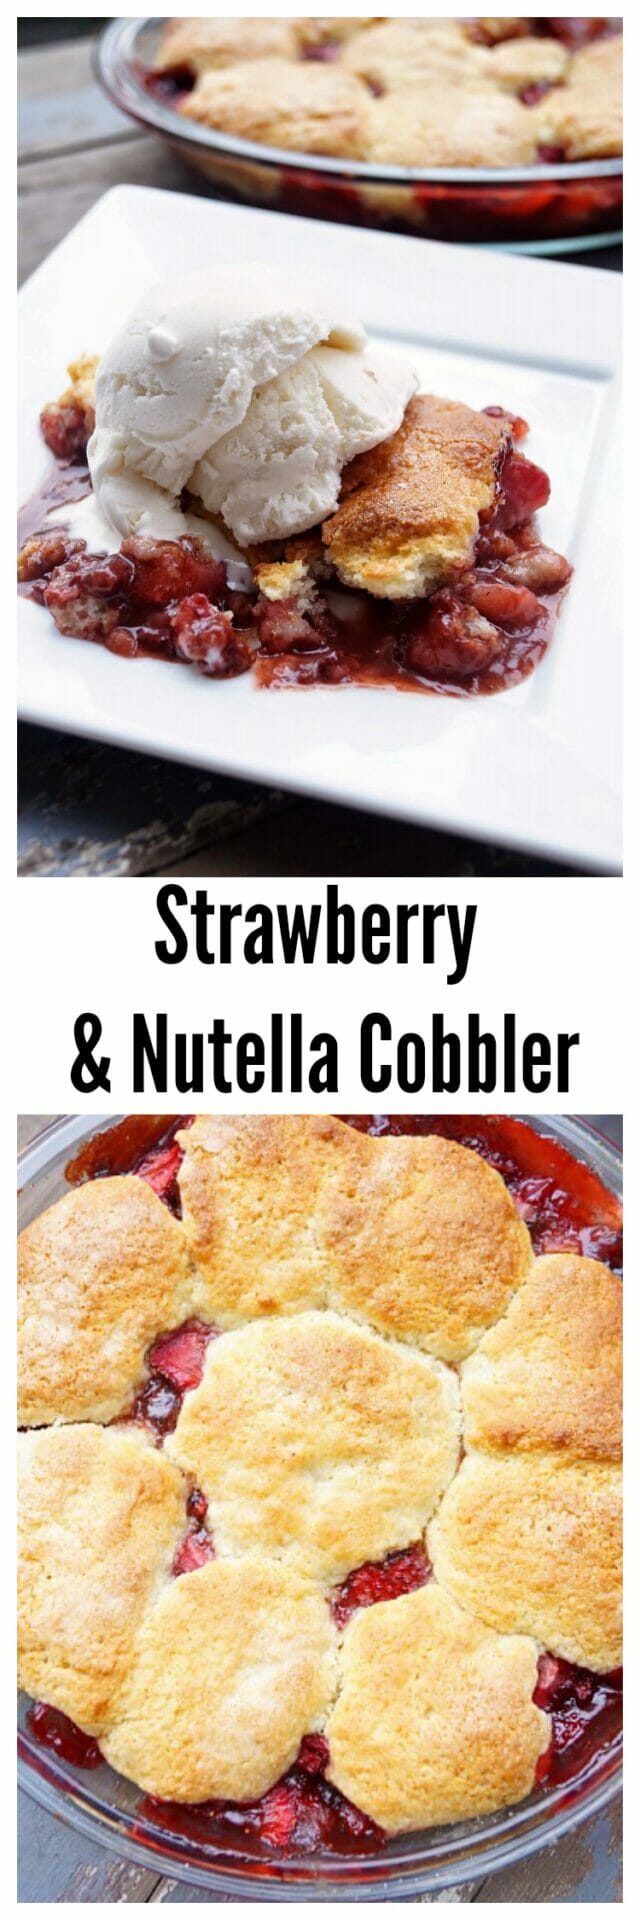 This easy strawberry and nutella cobbler is the perfect combination of sweet fruit, rich nutella, and a creamy, crumbly biscuit! 